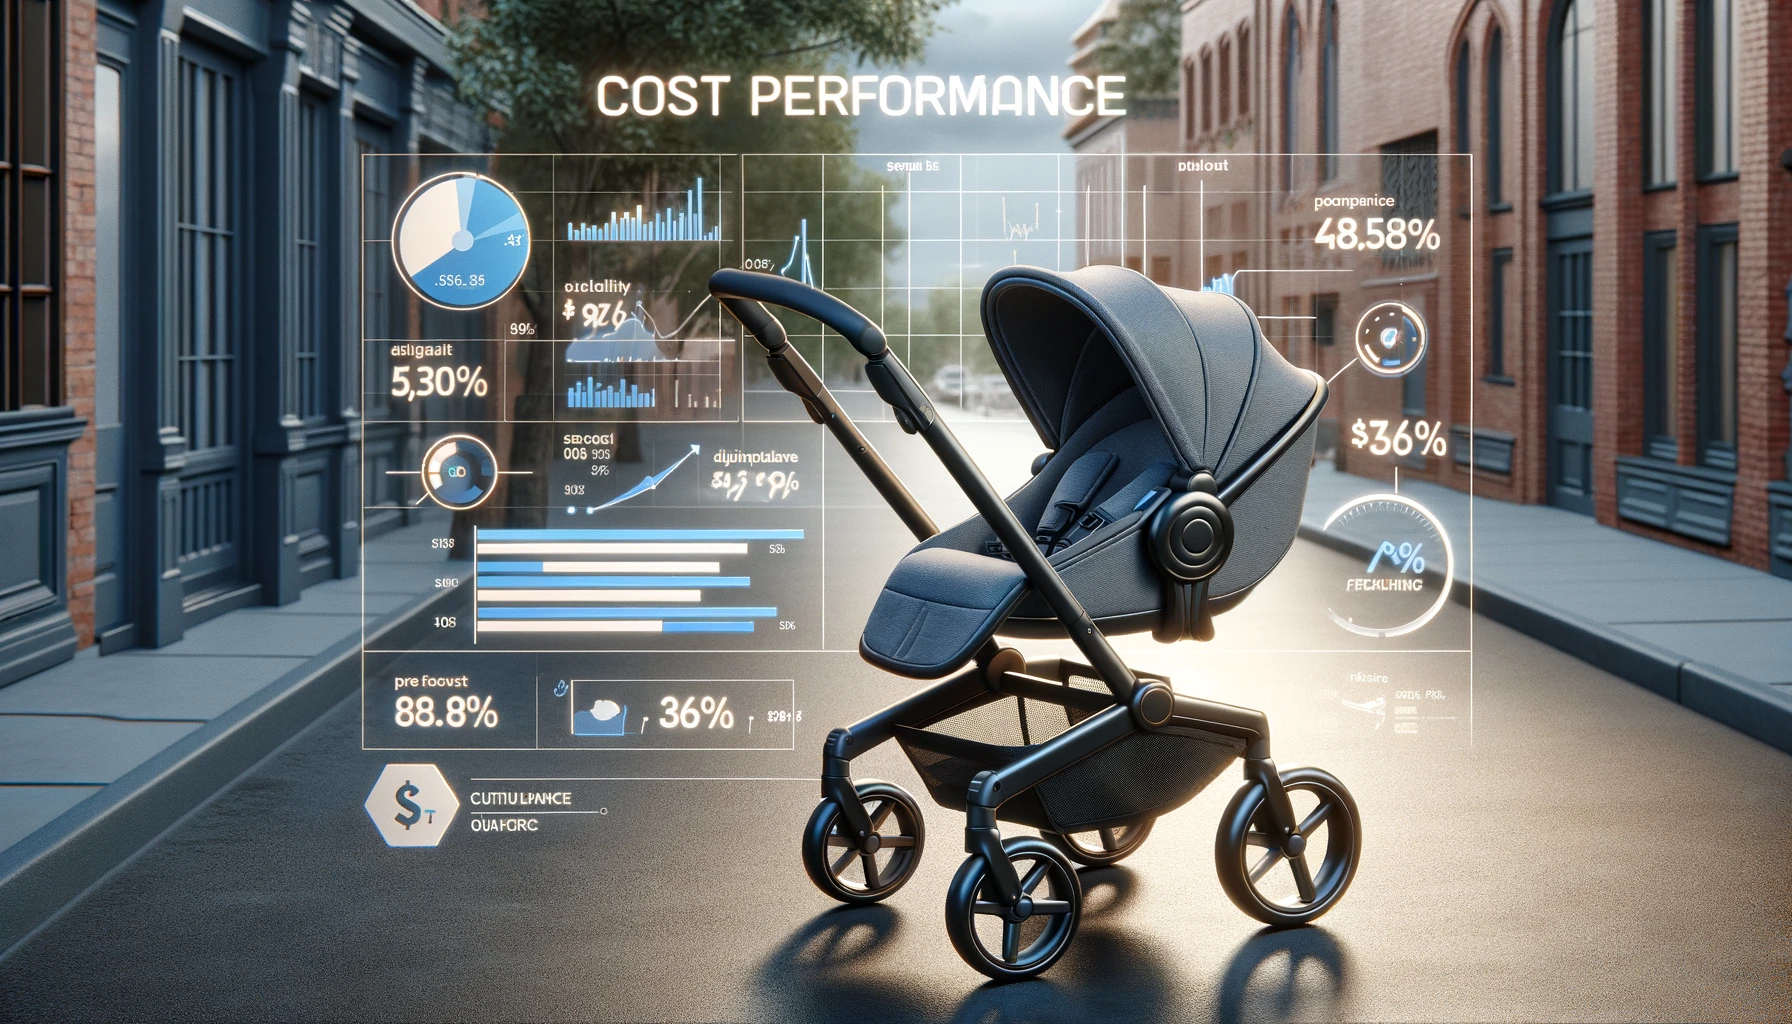 An image depicting a baby stroller that excels in cost performance and functionality. The stroller is designed with modern parents in mind, featuring a sleek, efficient design that doesn't skimp on features. It includes a spacious undercarriage basket, adjustable handles, and a comfortable, secure seating area for the baby. The stroller's materials are durable yet lightweight, making it easy to navigate and transport. The setting showcases the stroller in a real-life scenario, perhaps in a park or city sidewalk, emphasizing its versatility and value for money. The design and colors are stylish yet practical, appealing to budget-conscious families looking for quality and functionality.